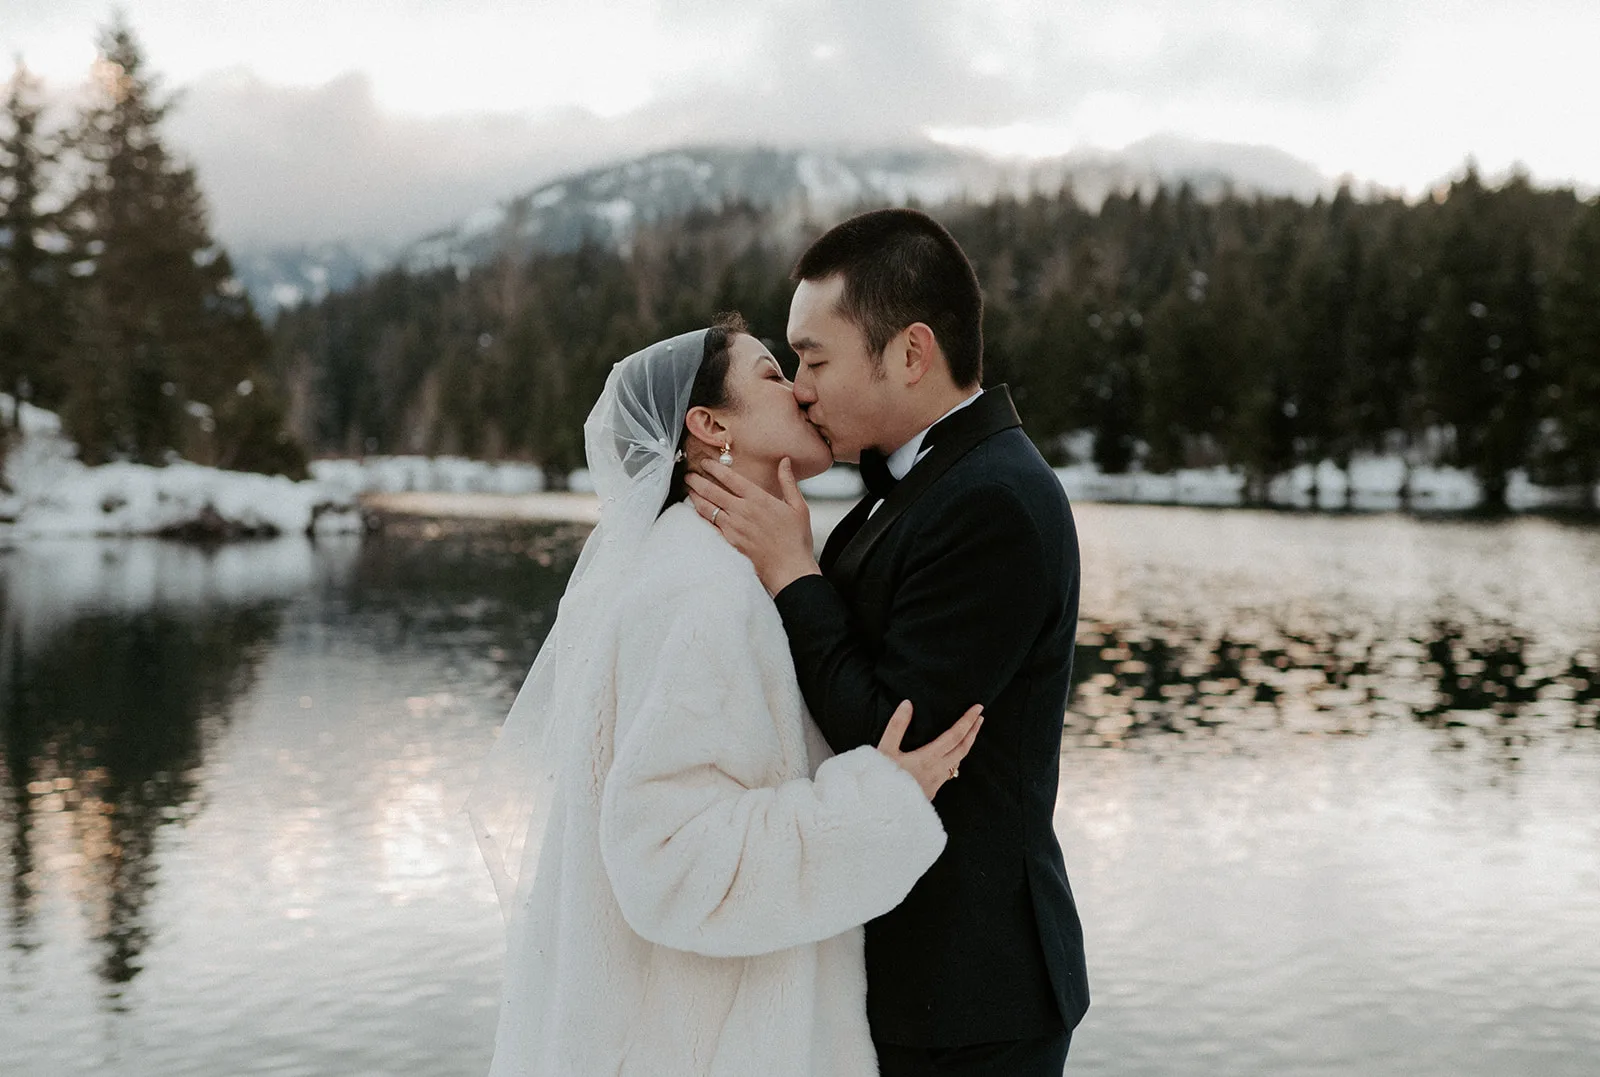 Newlyweds share a romantic kiss by the reflective waters of a snowy mountain lake.